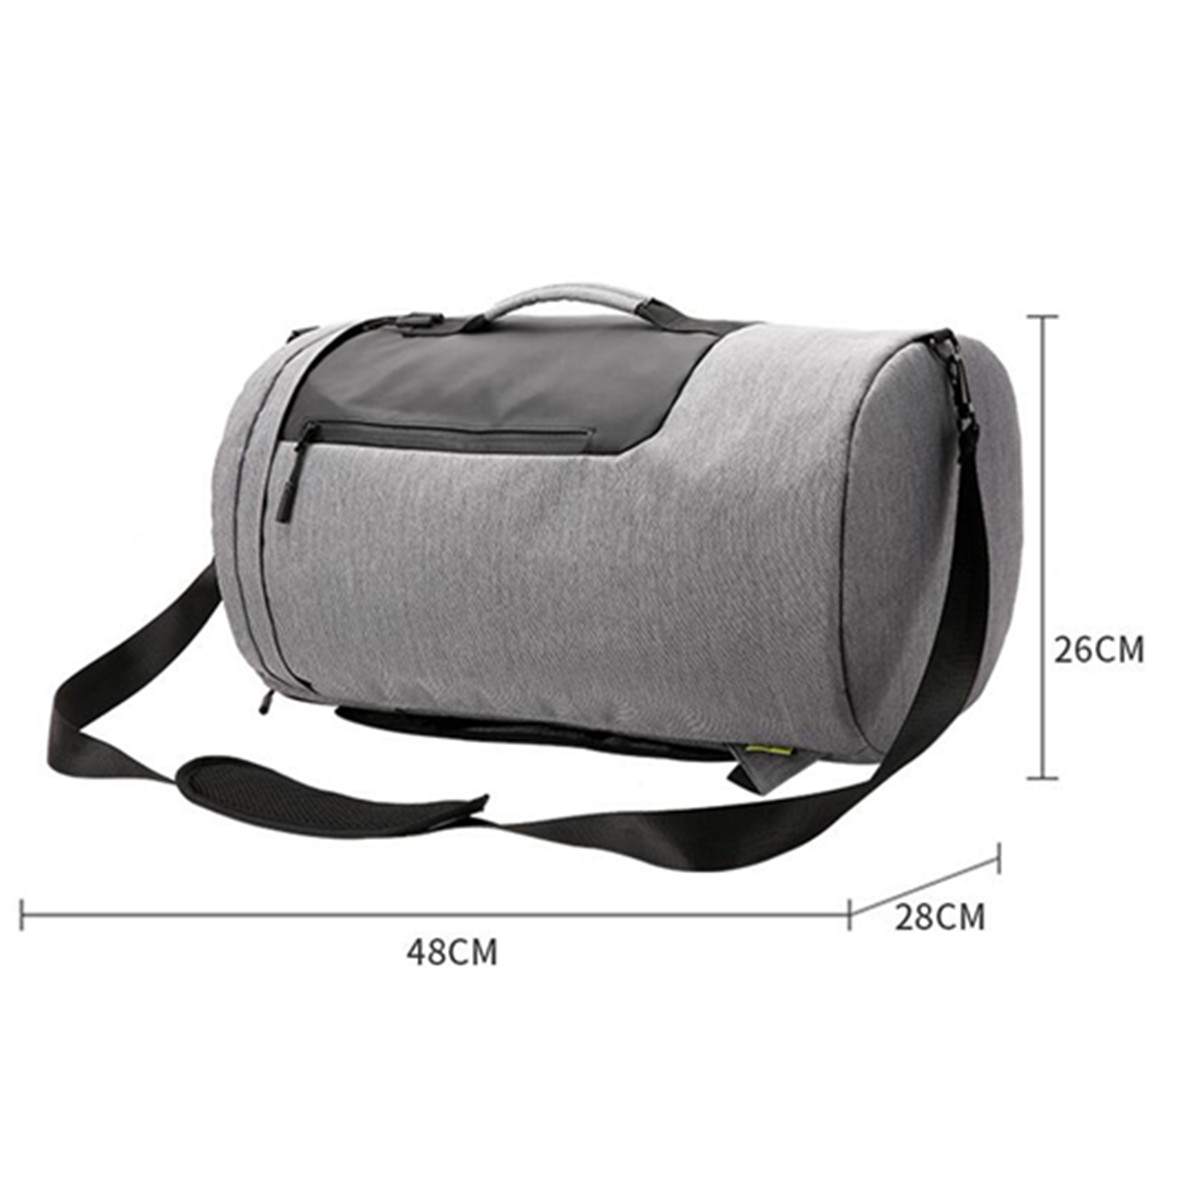 Mens-Travel-Bag-Duffle-Bag-Large-Capacity-Gym-With-Separate-Shoes-Compartment-Luggage-Storage-Contai-1425130